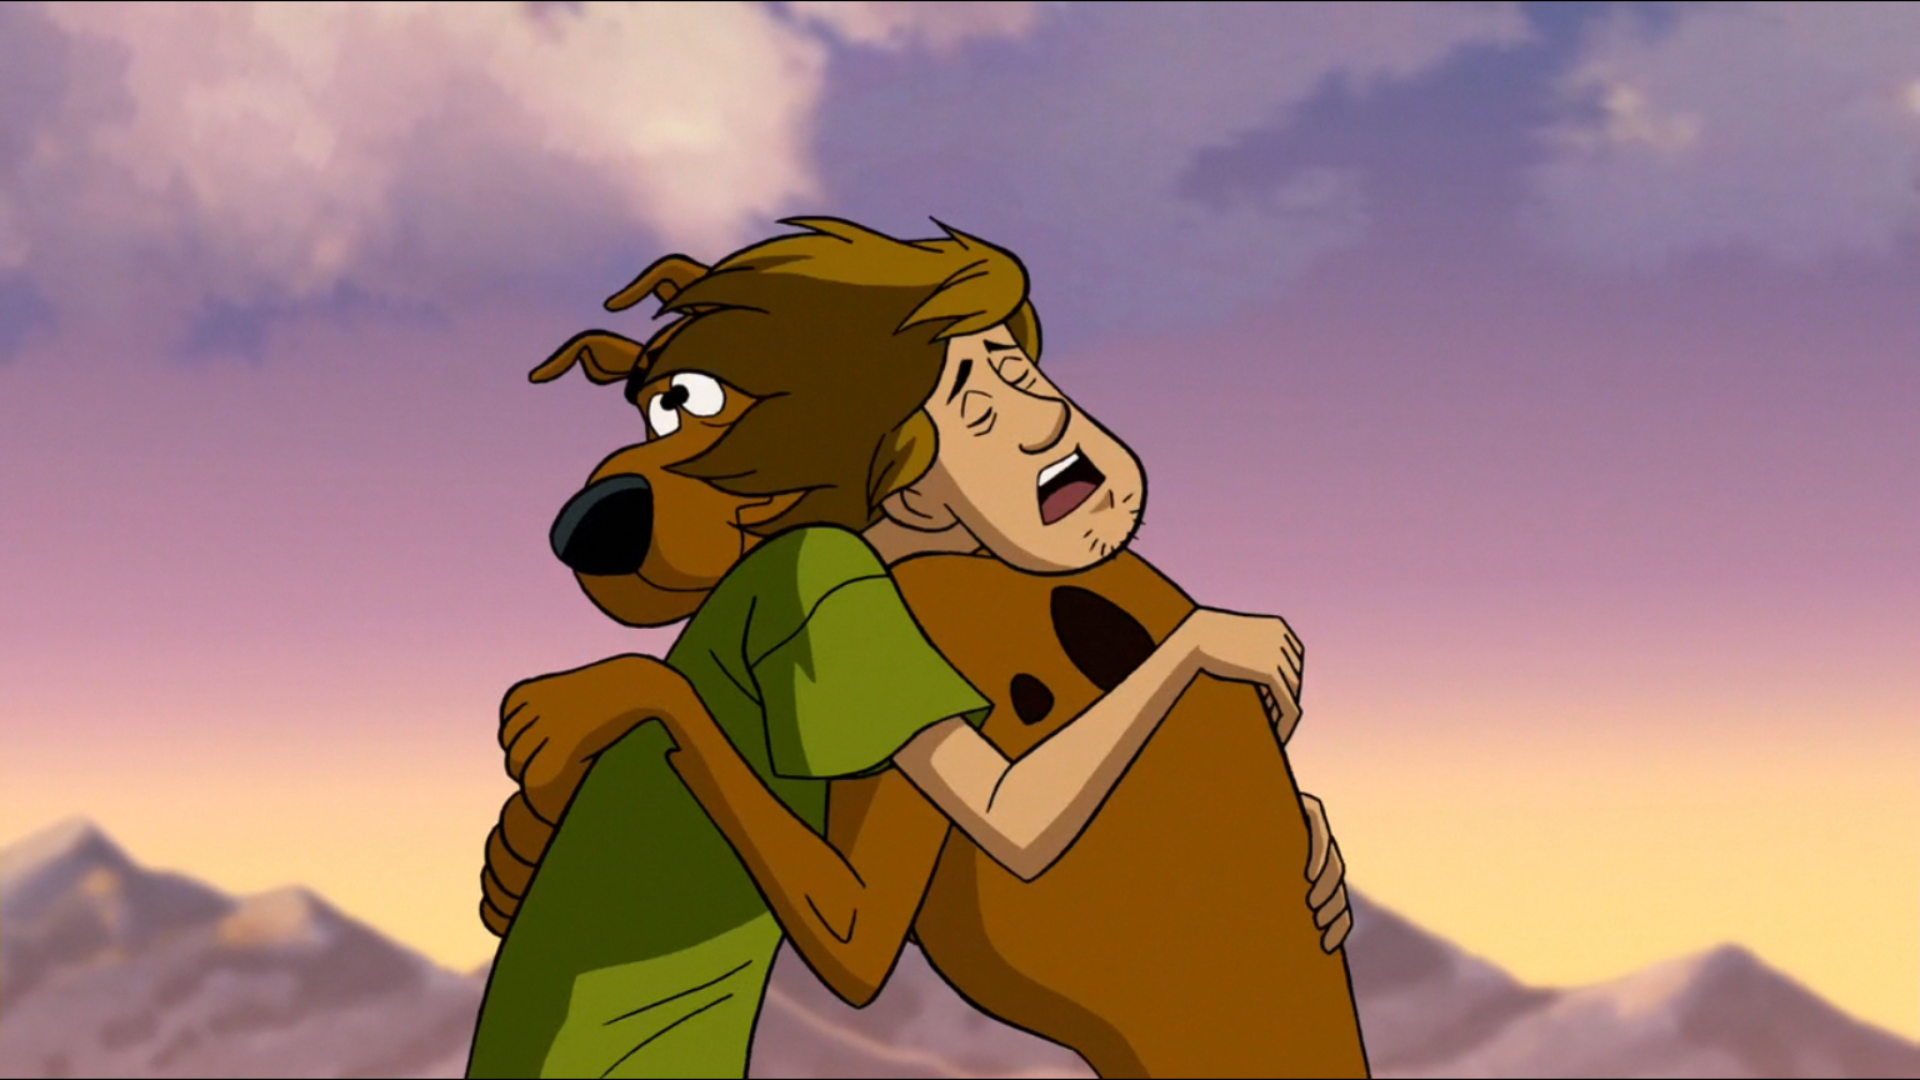 Ð�Ð°Ñ�Ñ�Ð¸Ð½ÐºÐ¸ Ð¿Ð¾ Ð·Ð°Ð¿Ñ�Ð¾Ñ�Ñ� Scooby and Shaggy